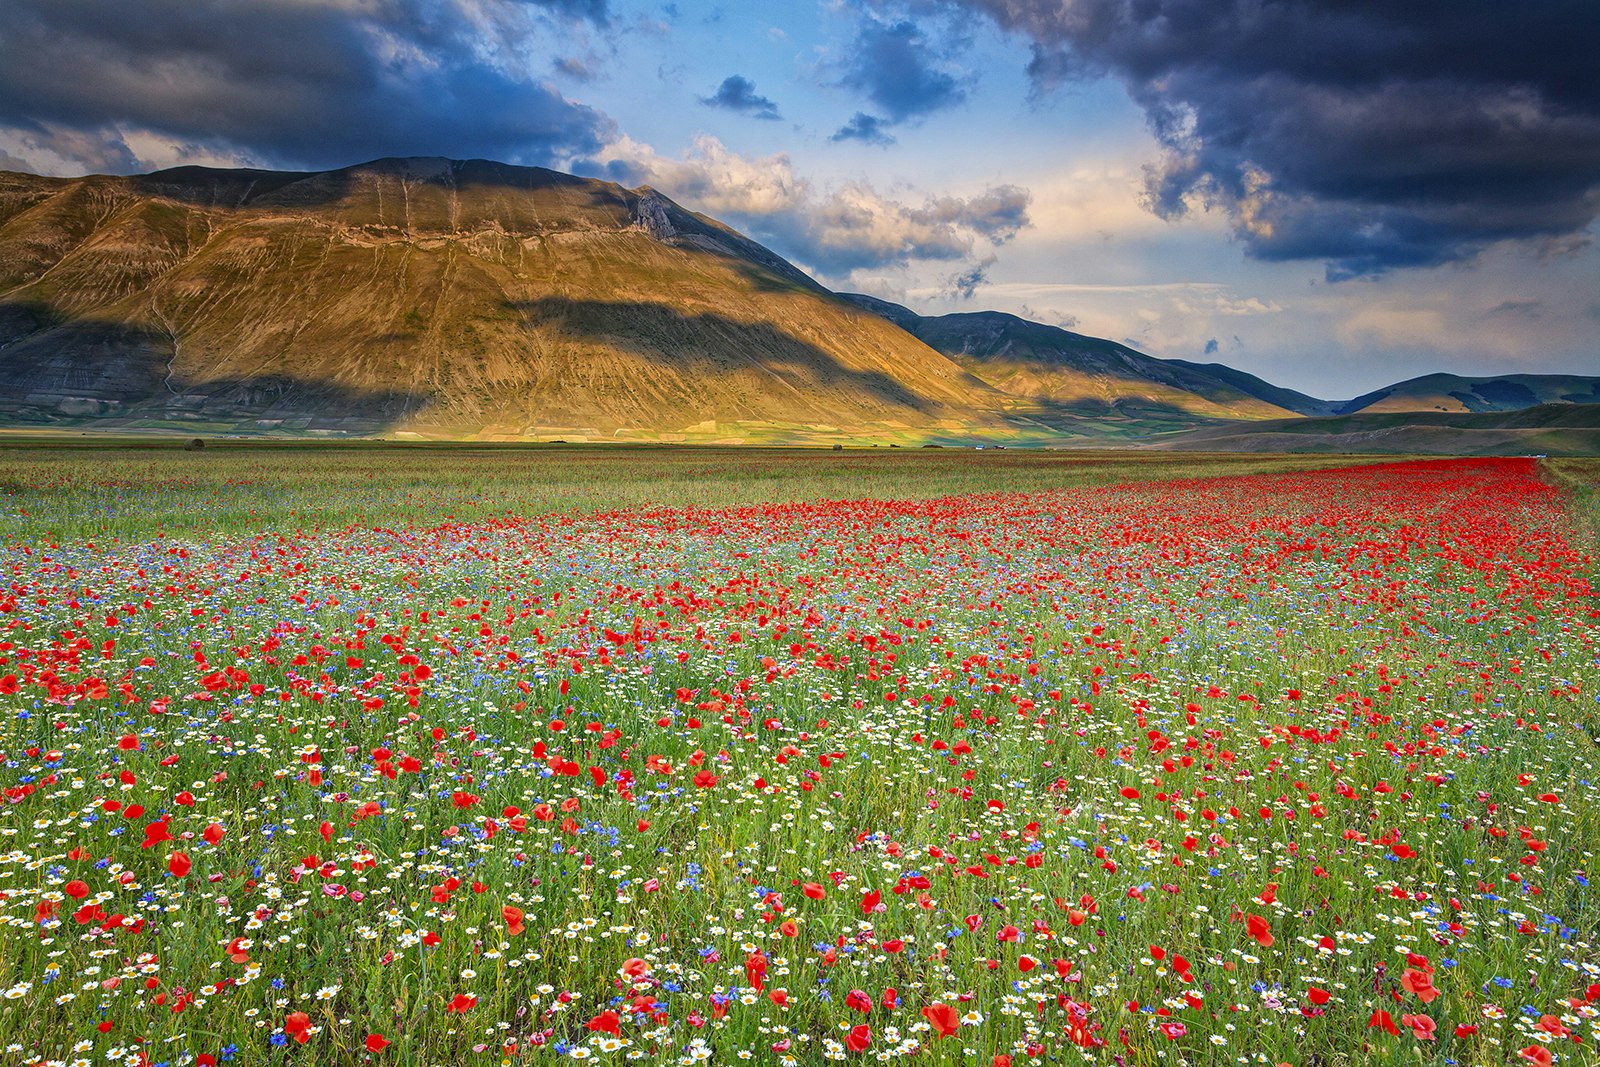 A field of red, blue and white wildflowers sits before a stone mountain in Parco Nazionale dei Monti Sibillini. Le Marche, Italy.